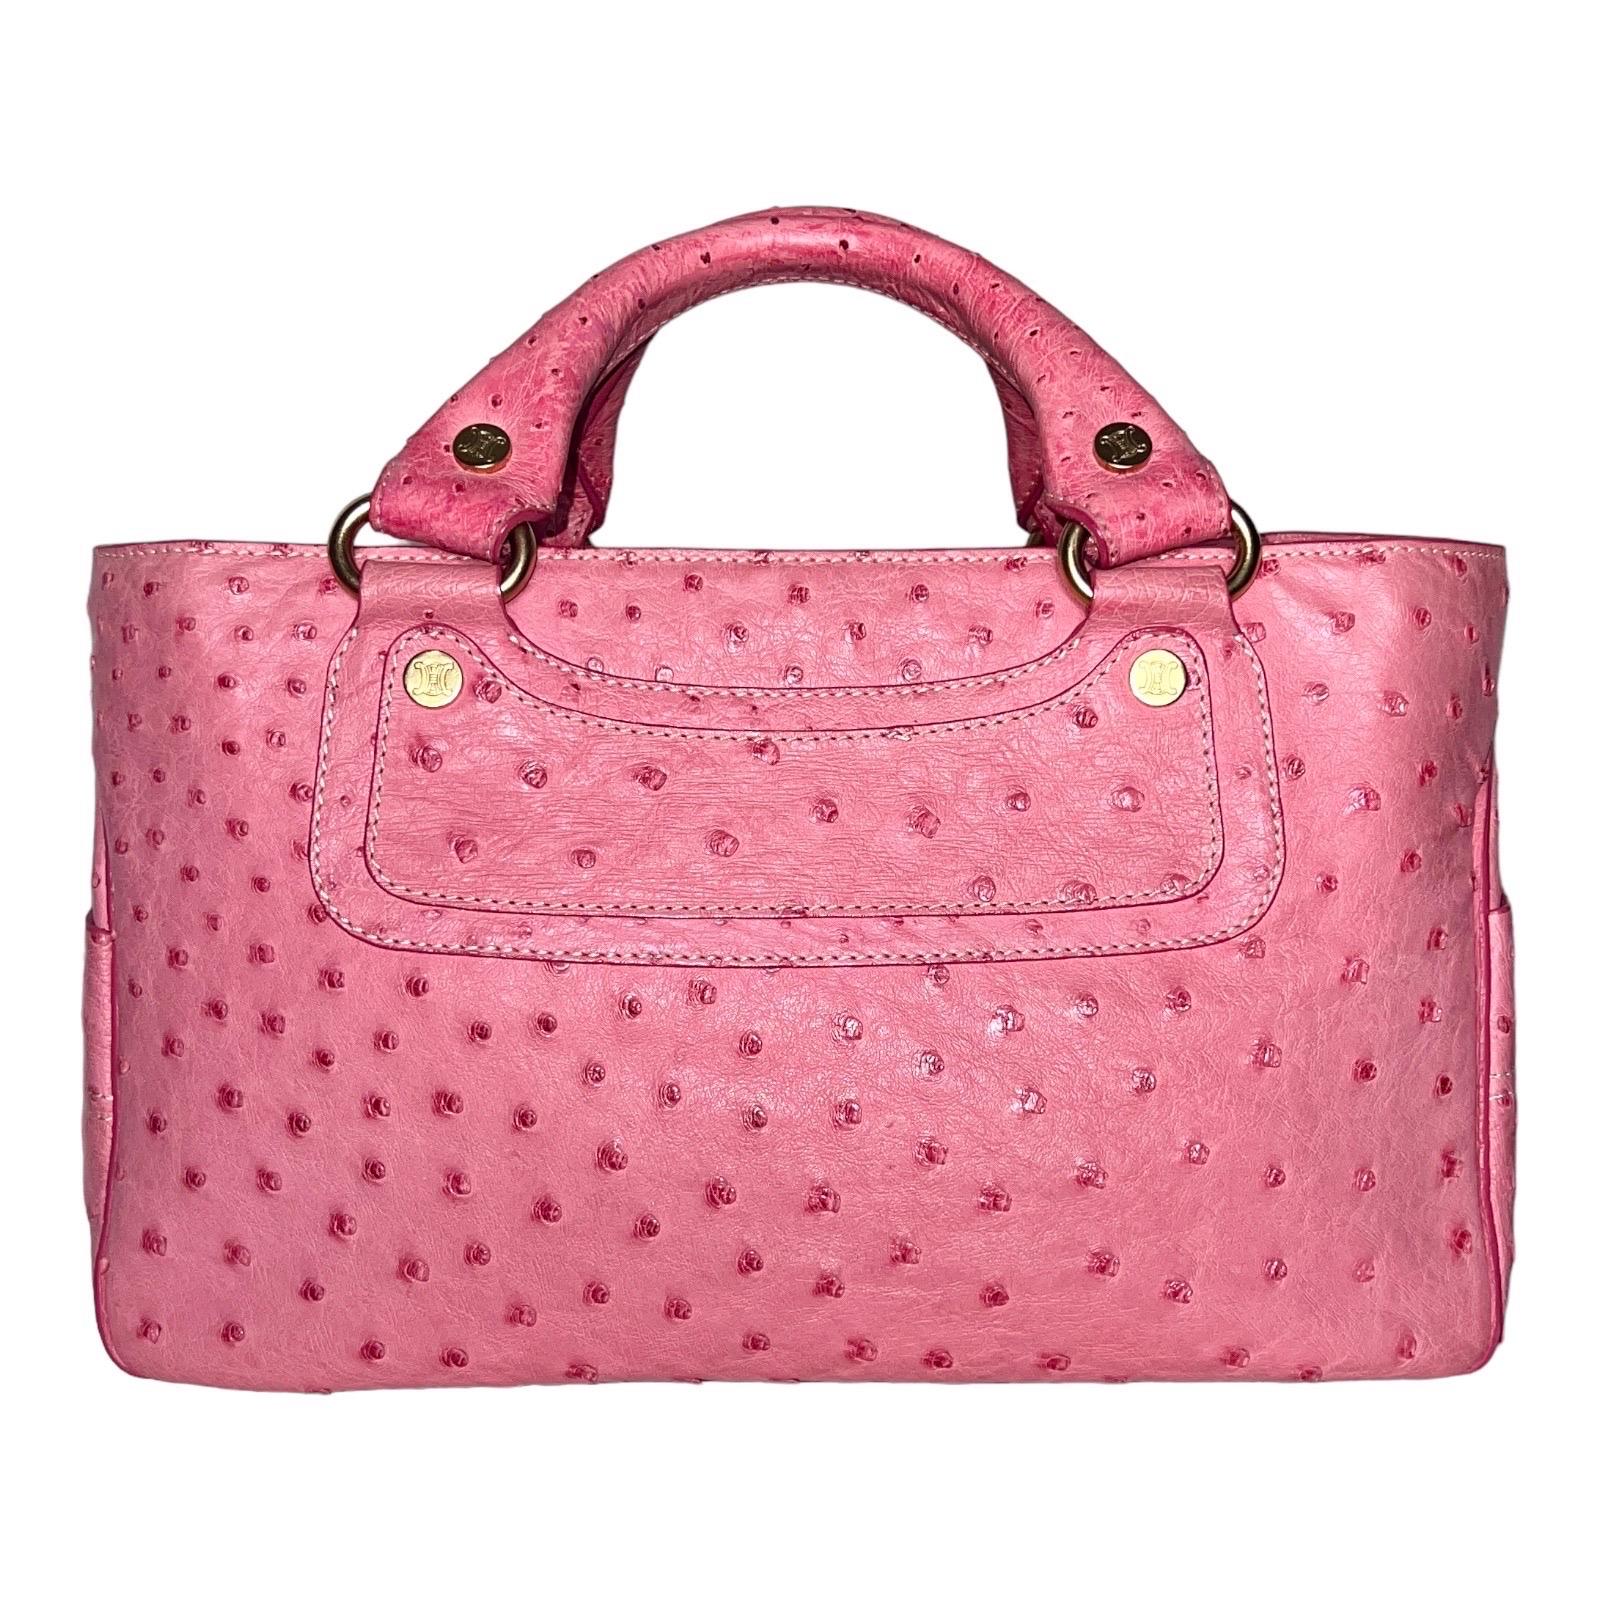 CELINE Rare Exotic Pink „Barbie“ Ostrich Skin Boogie Bag by Michael Kors 2000s In Good Condition For Sale In Switzerland, CH